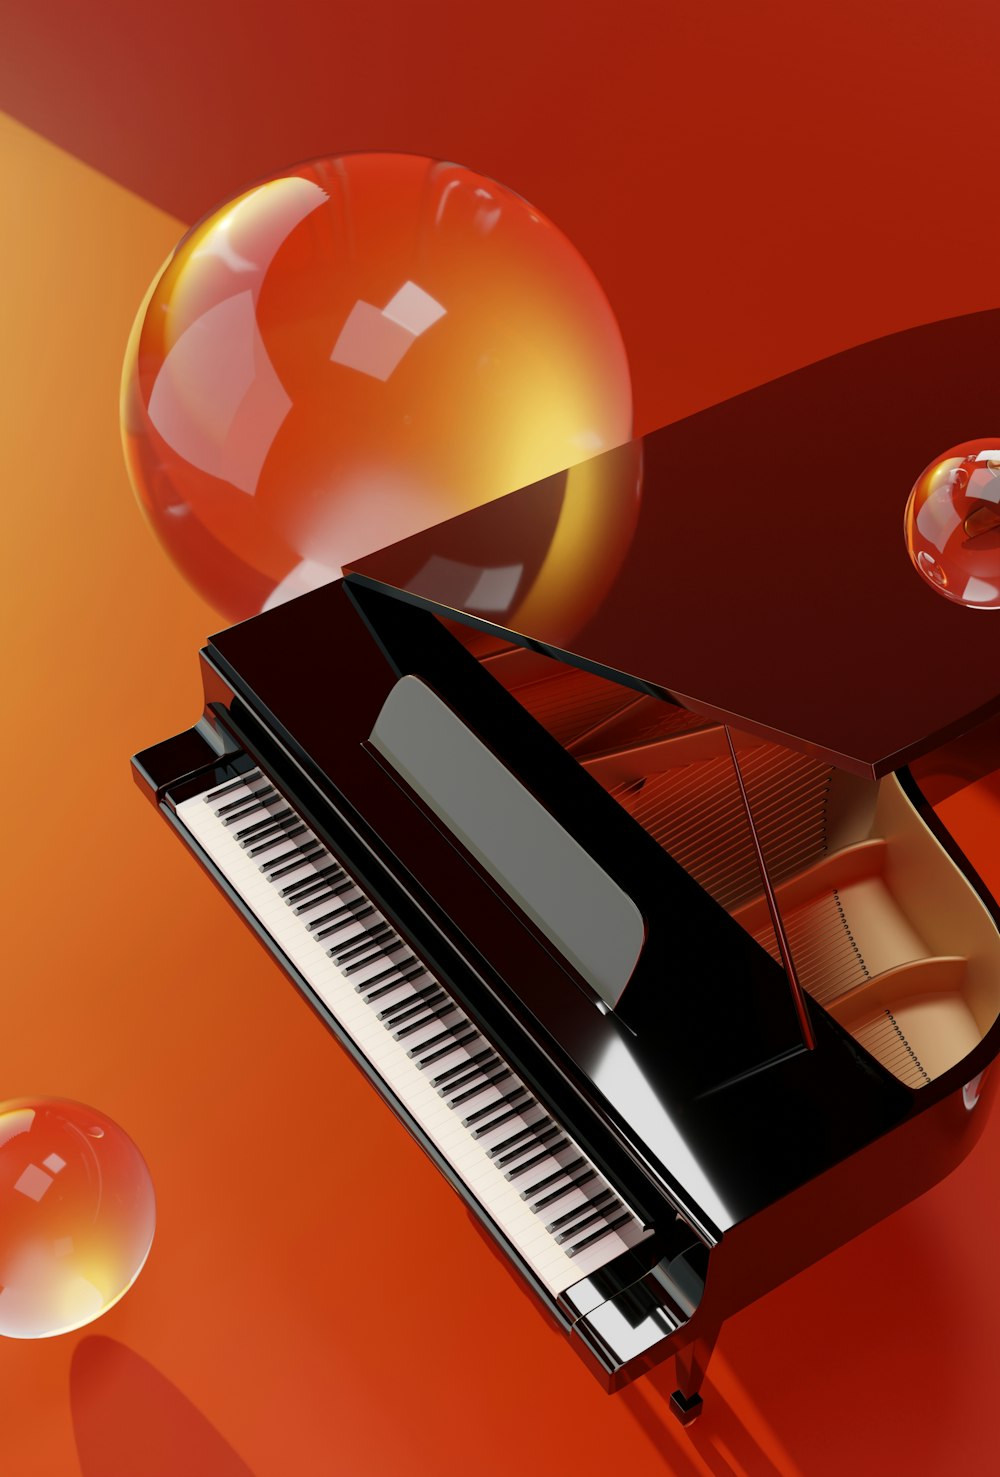 a piano and a ball on a red background